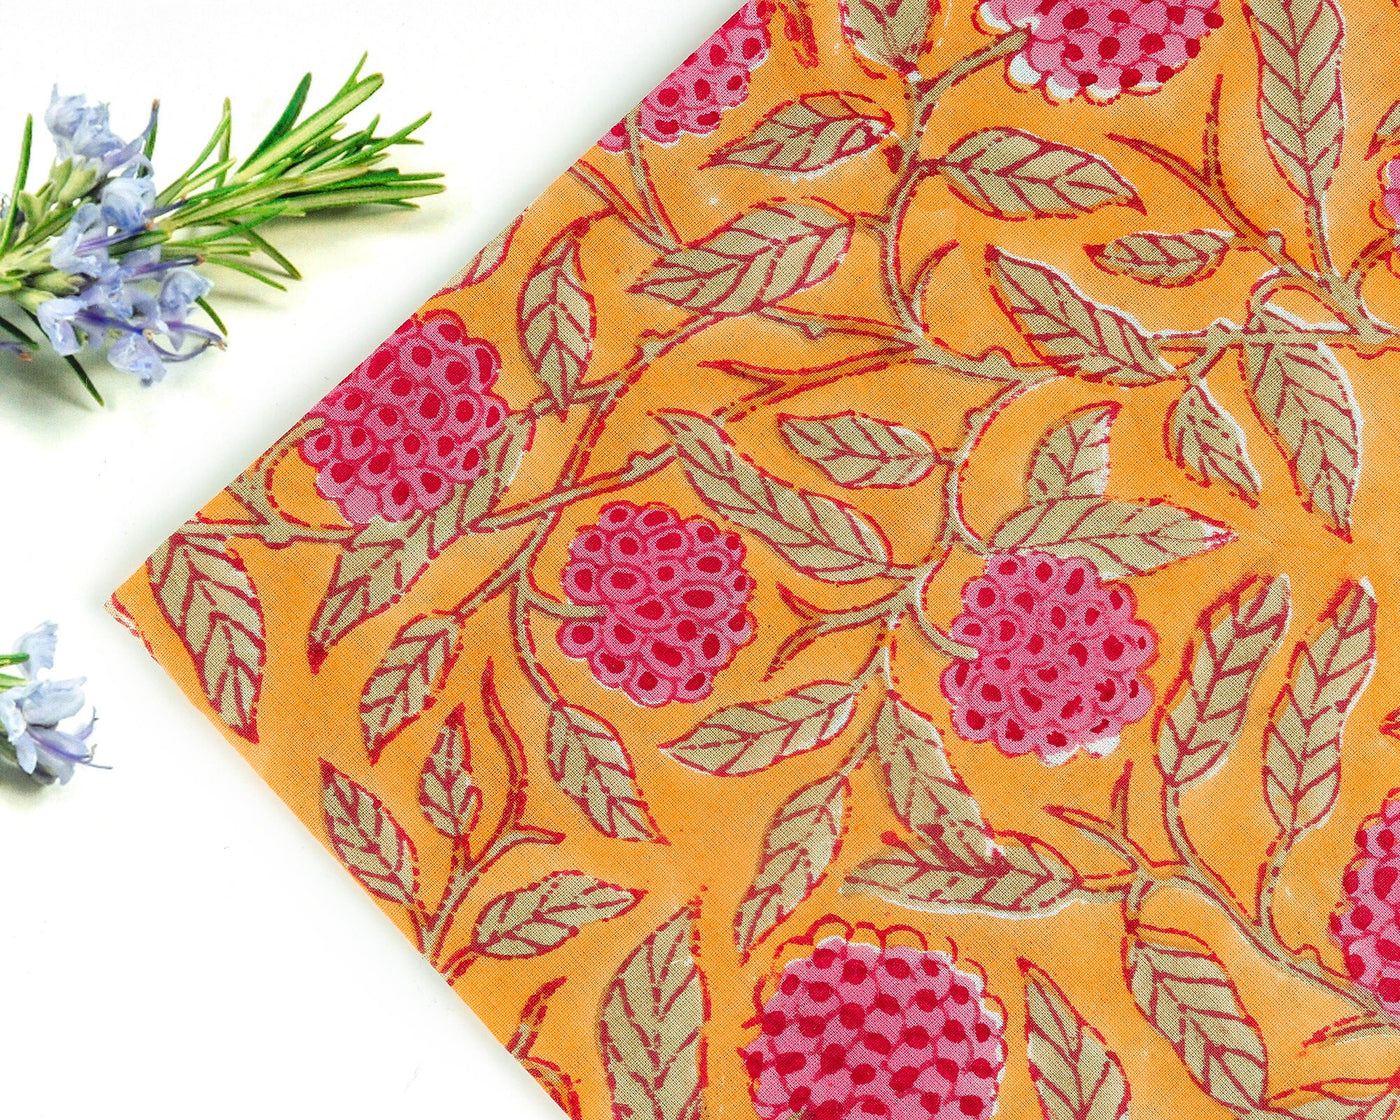 Fabricrush Amber Yellow, Rose Pink, Laurel Green Indian Hand Block Floral Printed Cotton Cloth Napkins Wedding Event Party, 18x18"-Cocktail 20x20"-Dinner